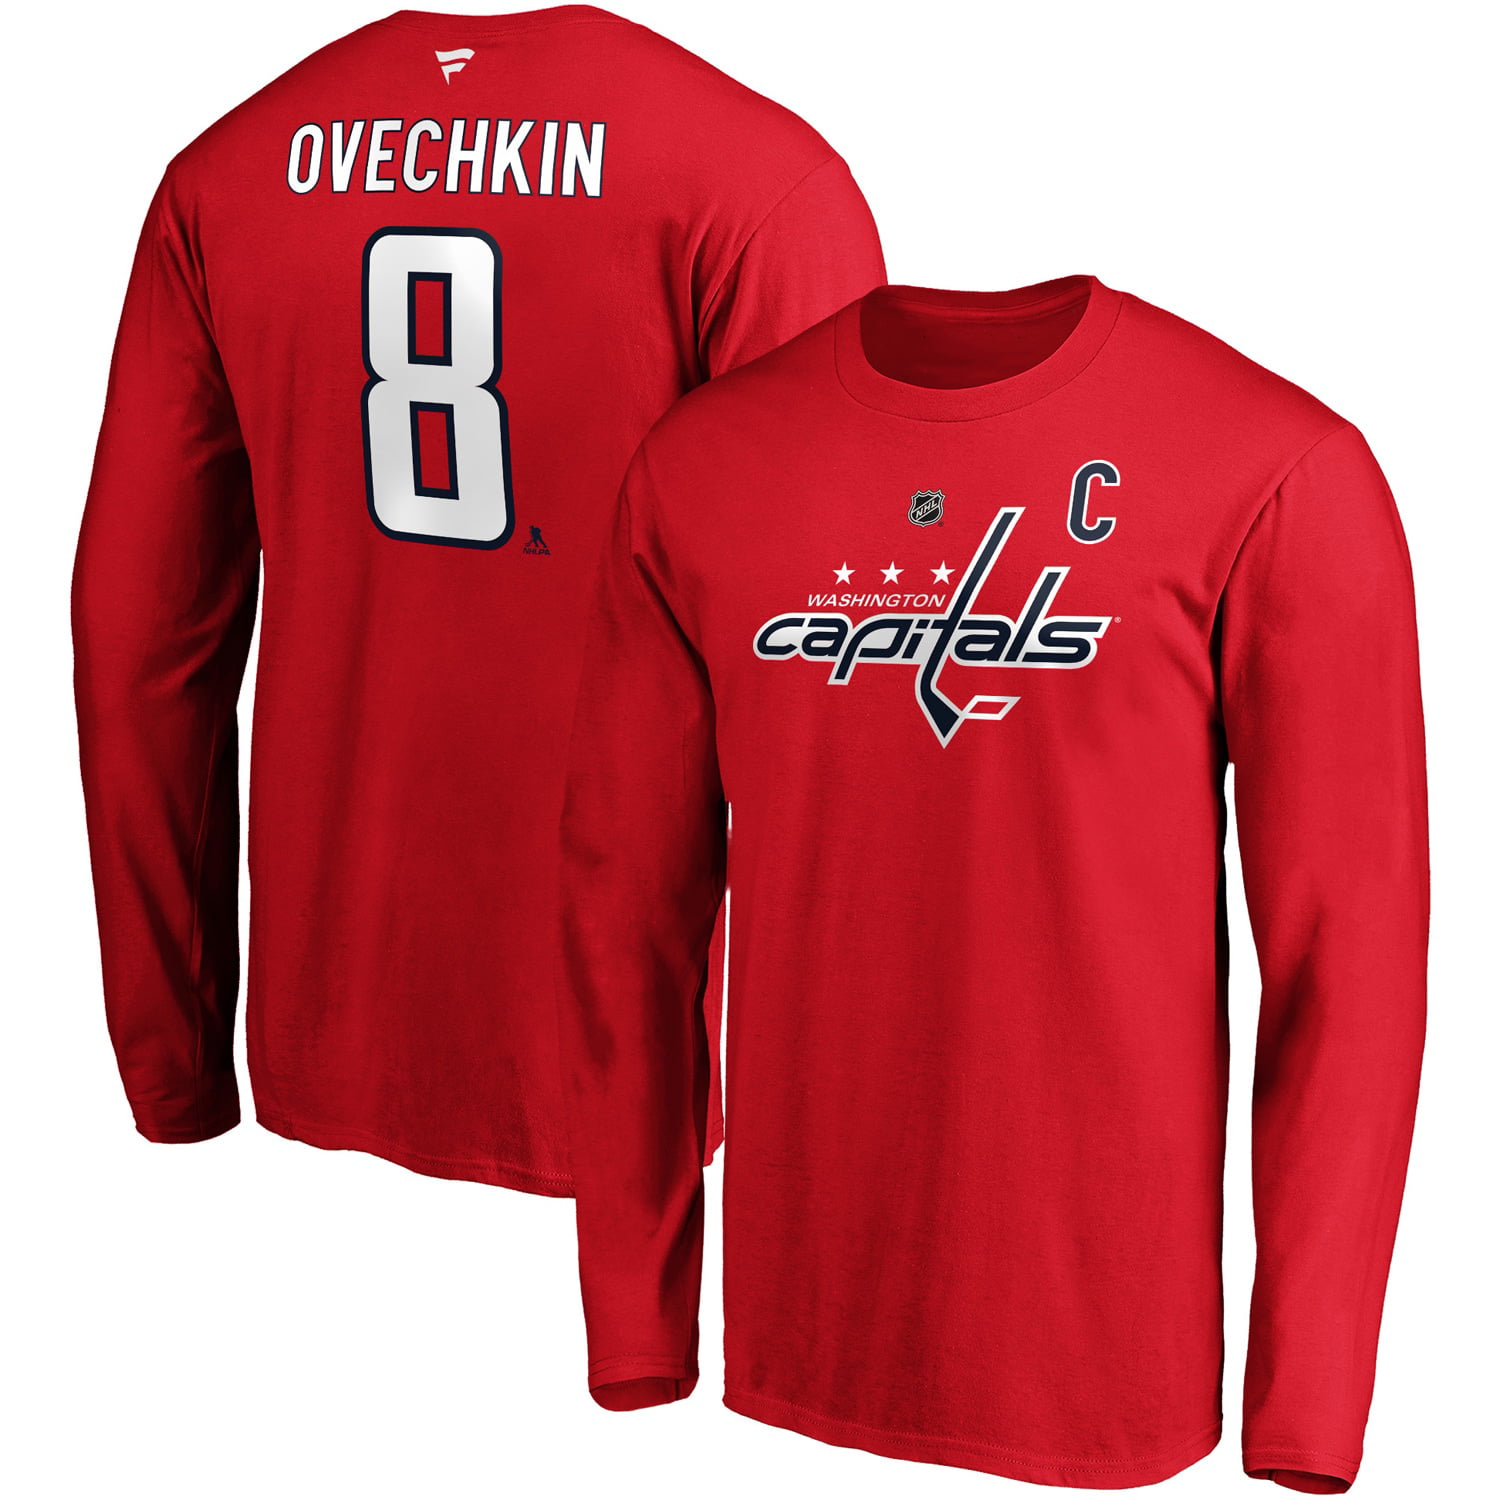 alex ovechkin jersey for sale